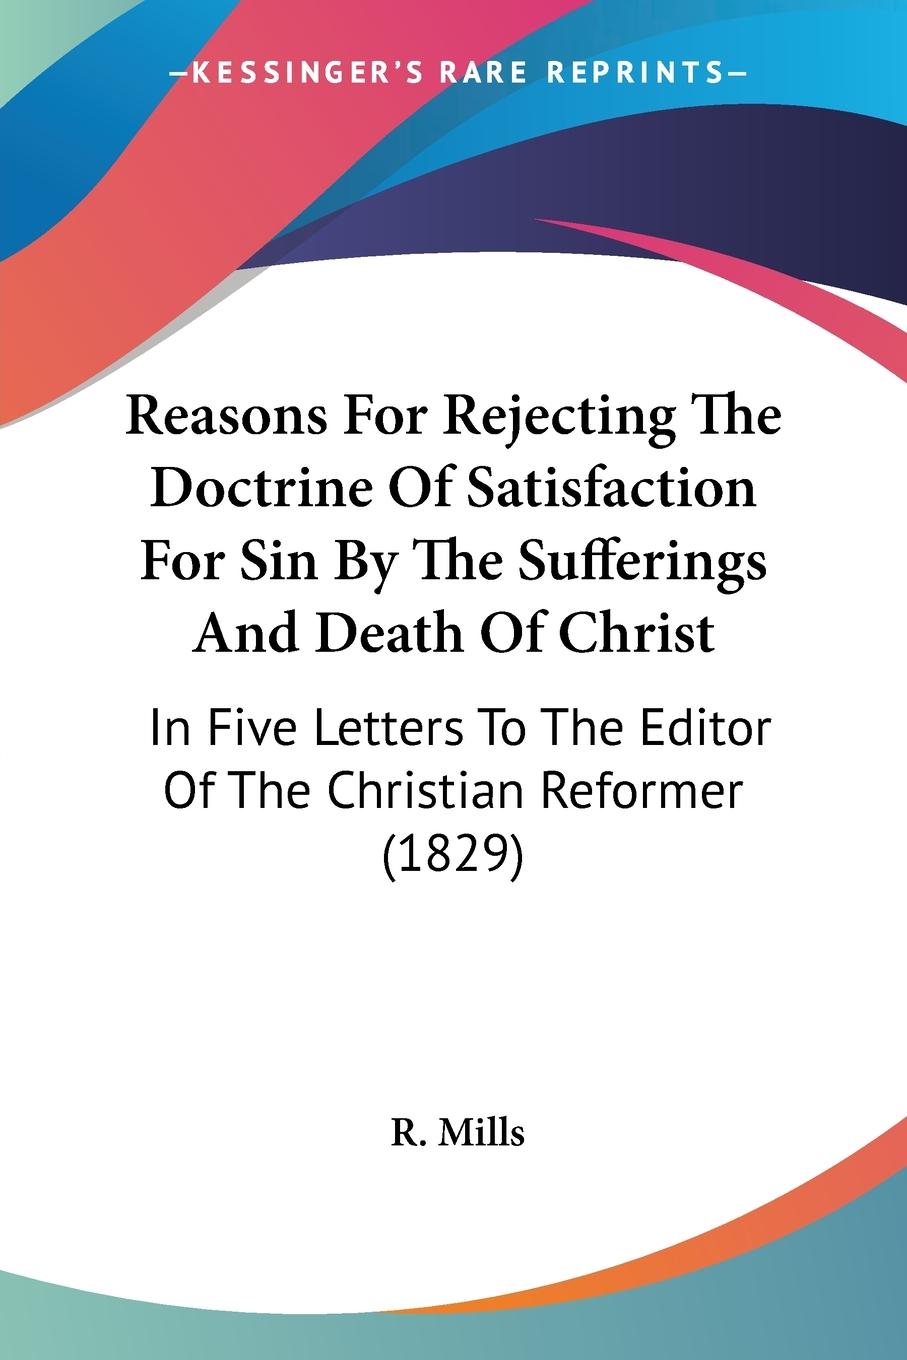 Reasons For Rejecting The Doctrine Of Satisfaction For Sin By The Sufferings And Death Of Christ - Mills, R.